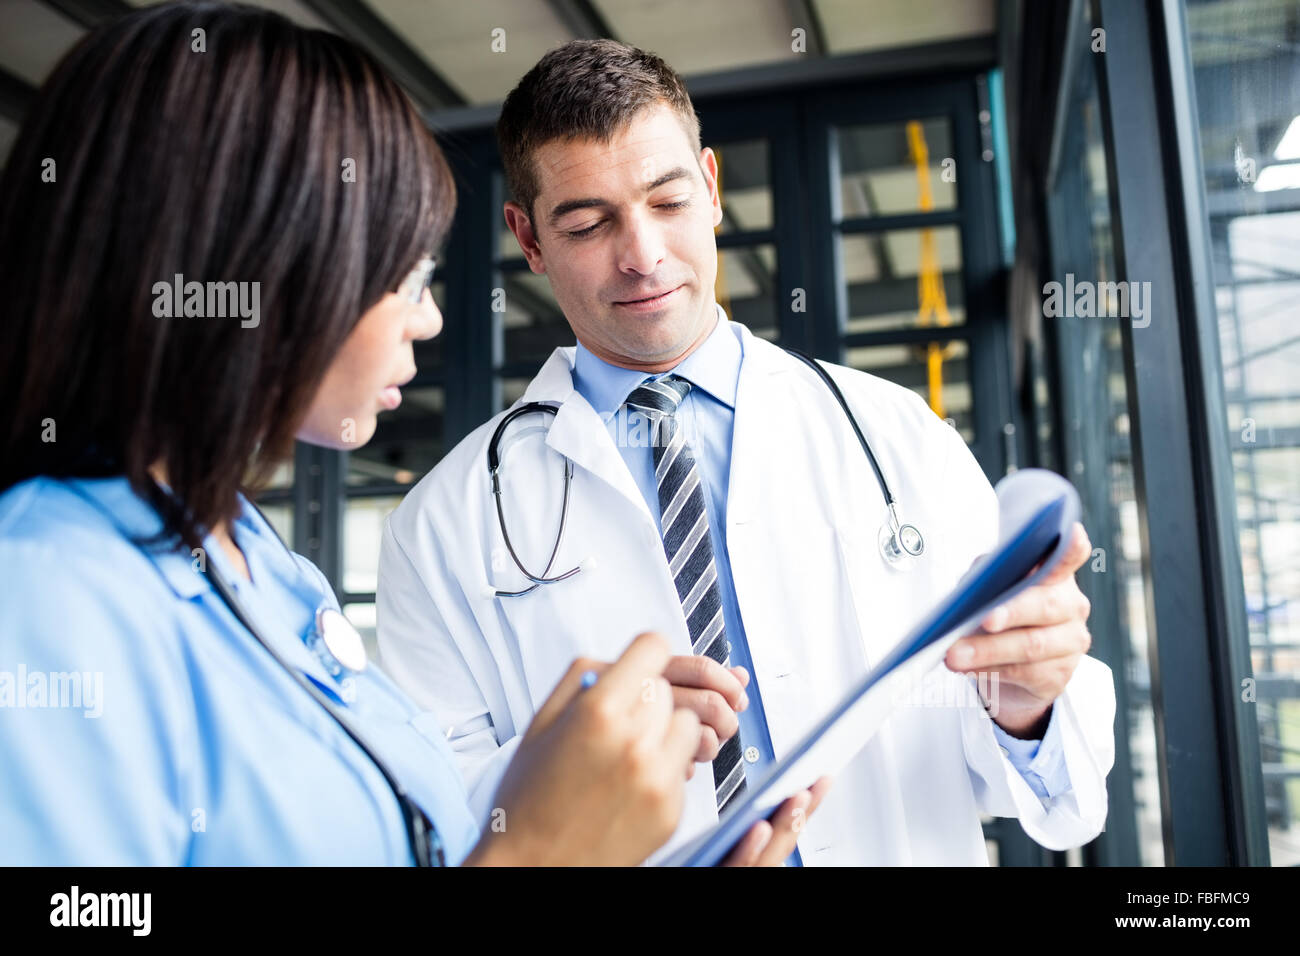 Nurse and doctor looking at files Stock Photo